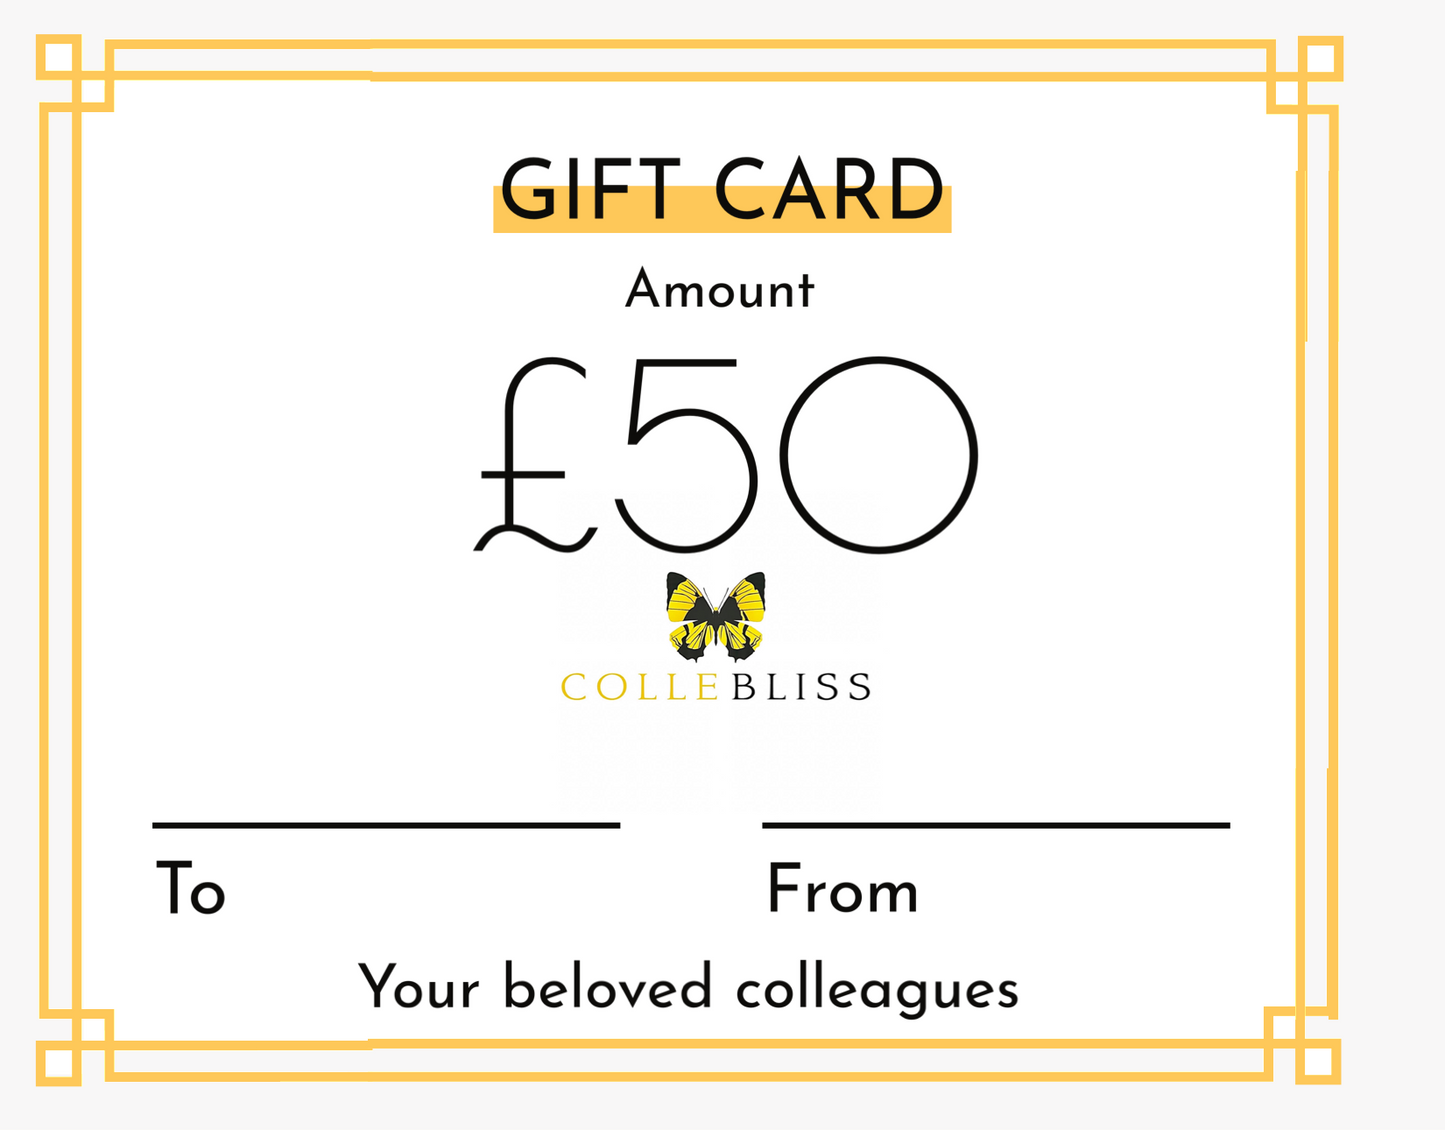 Gift Card for Colleagues